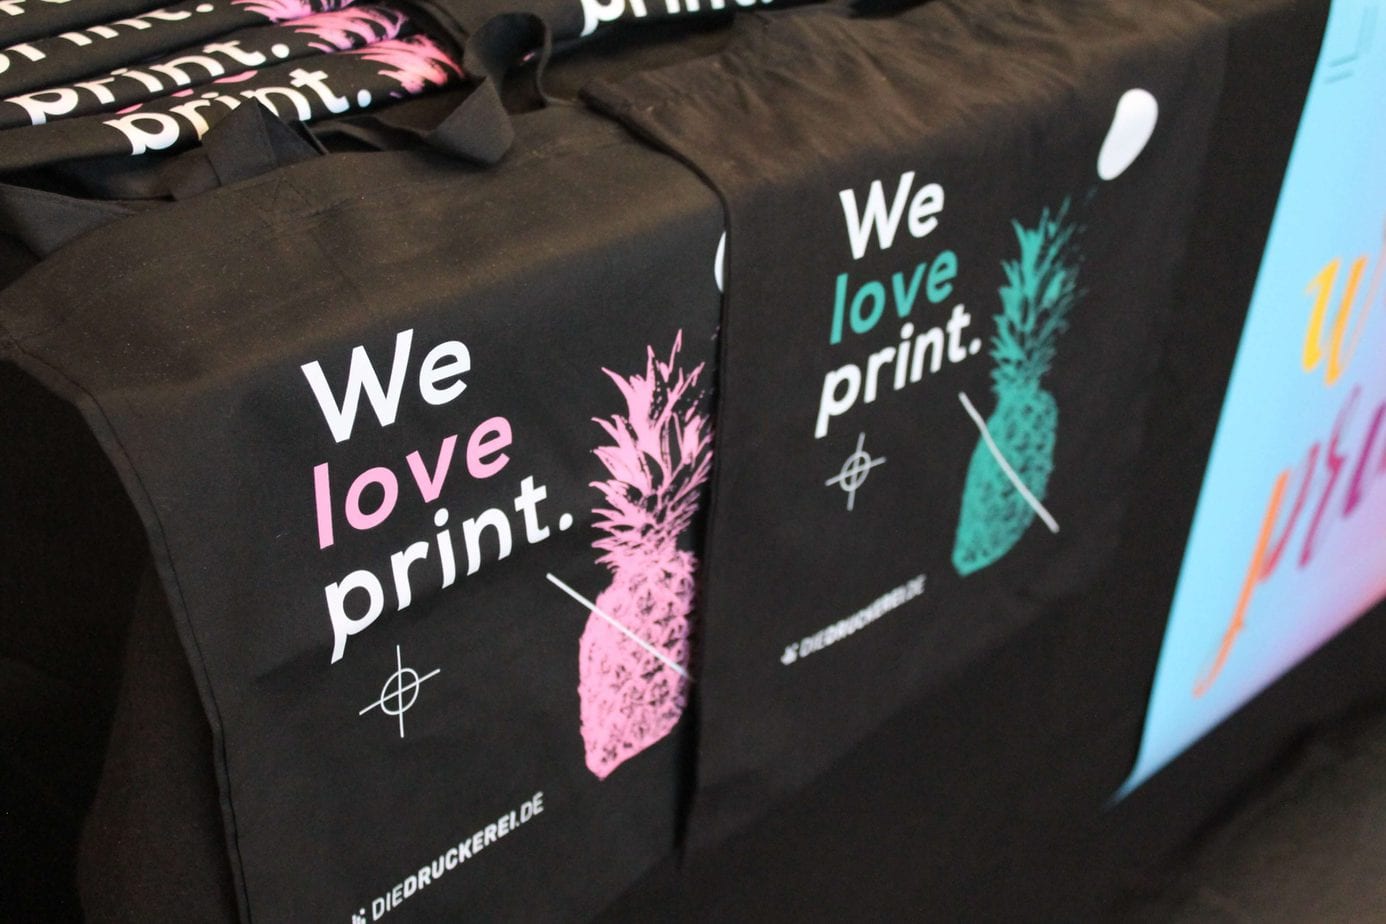 Judge by… graphics! How to create the perfect printed product?